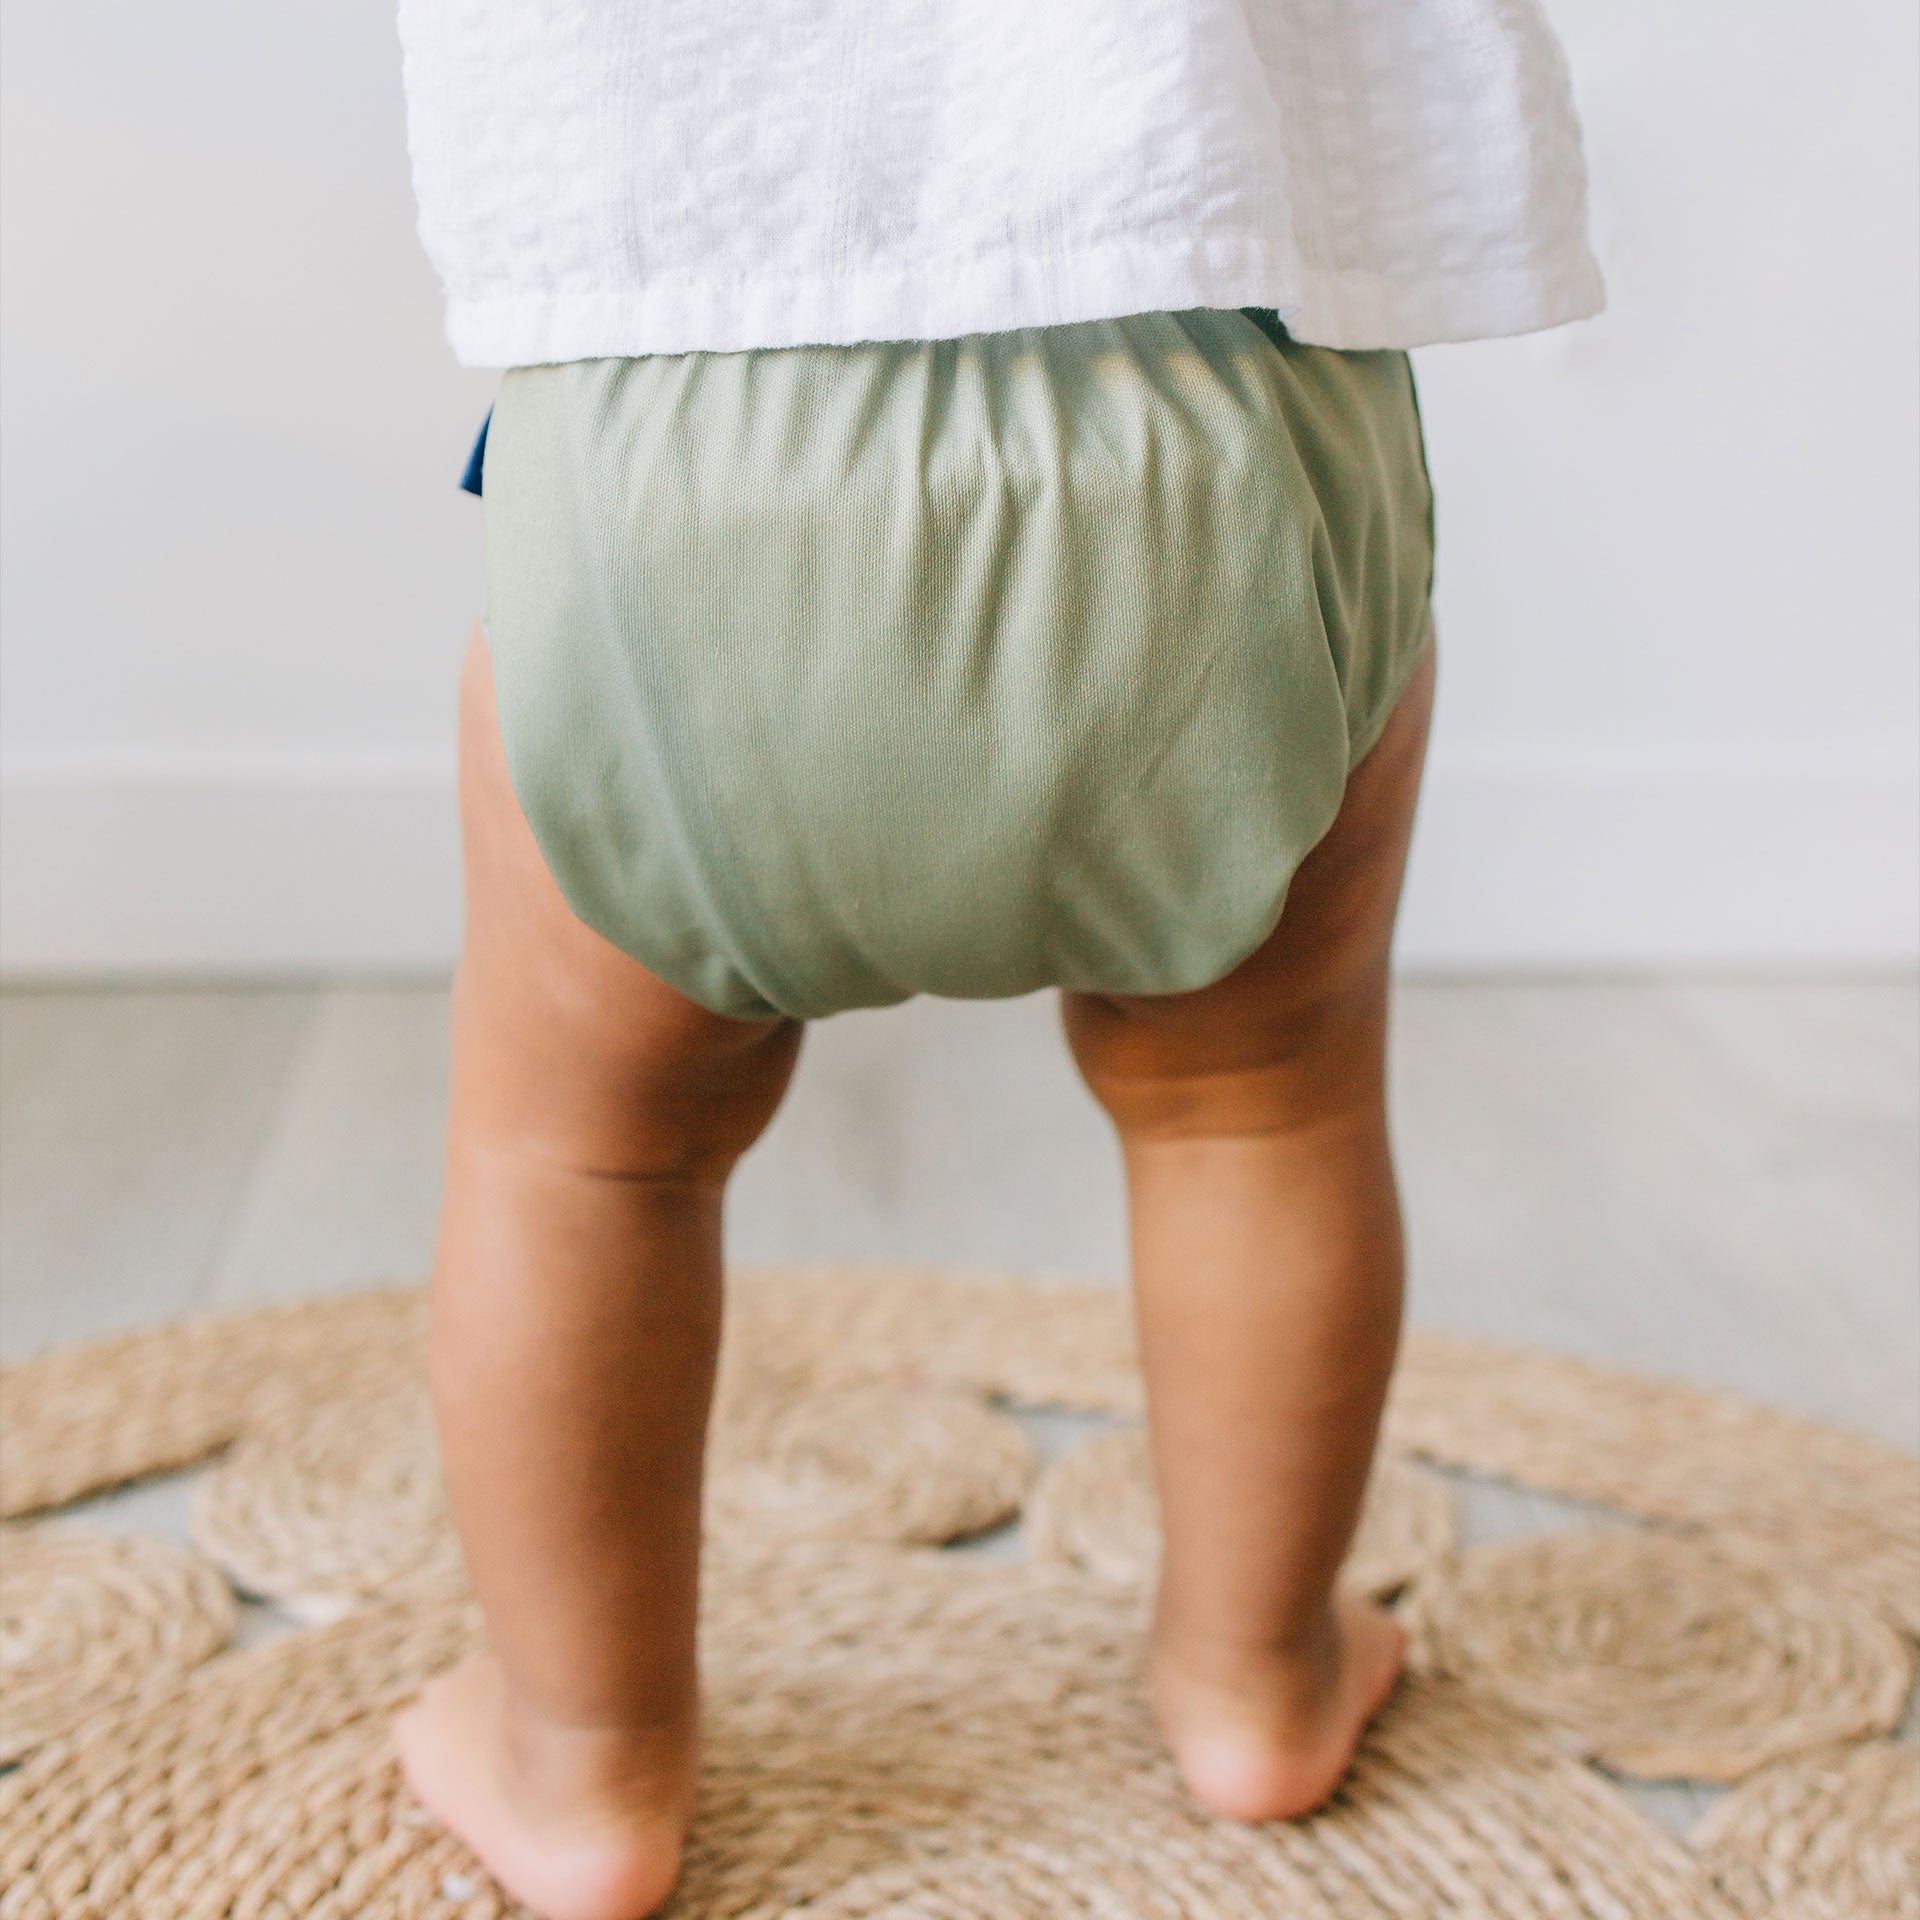 Pocket Diapers vs. Diaper Covers: Which style is right for your family? –  Kinder Cloth Diaper Co.